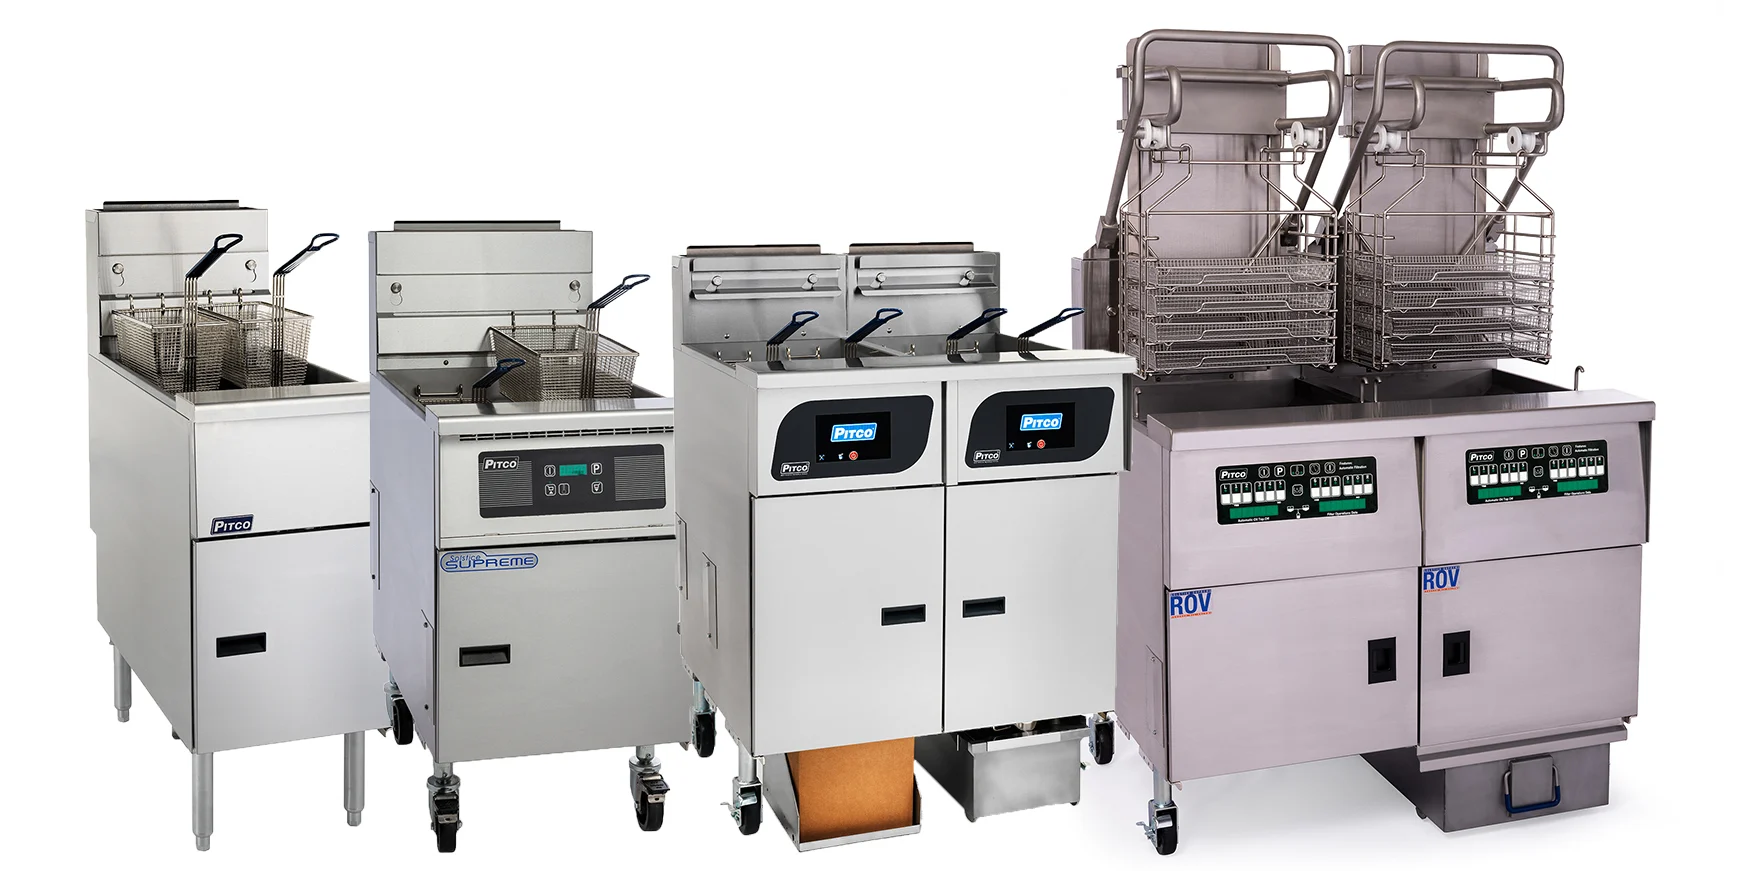 Kitchen Equipment for Chips/Chicken Electric Fryers DF-26